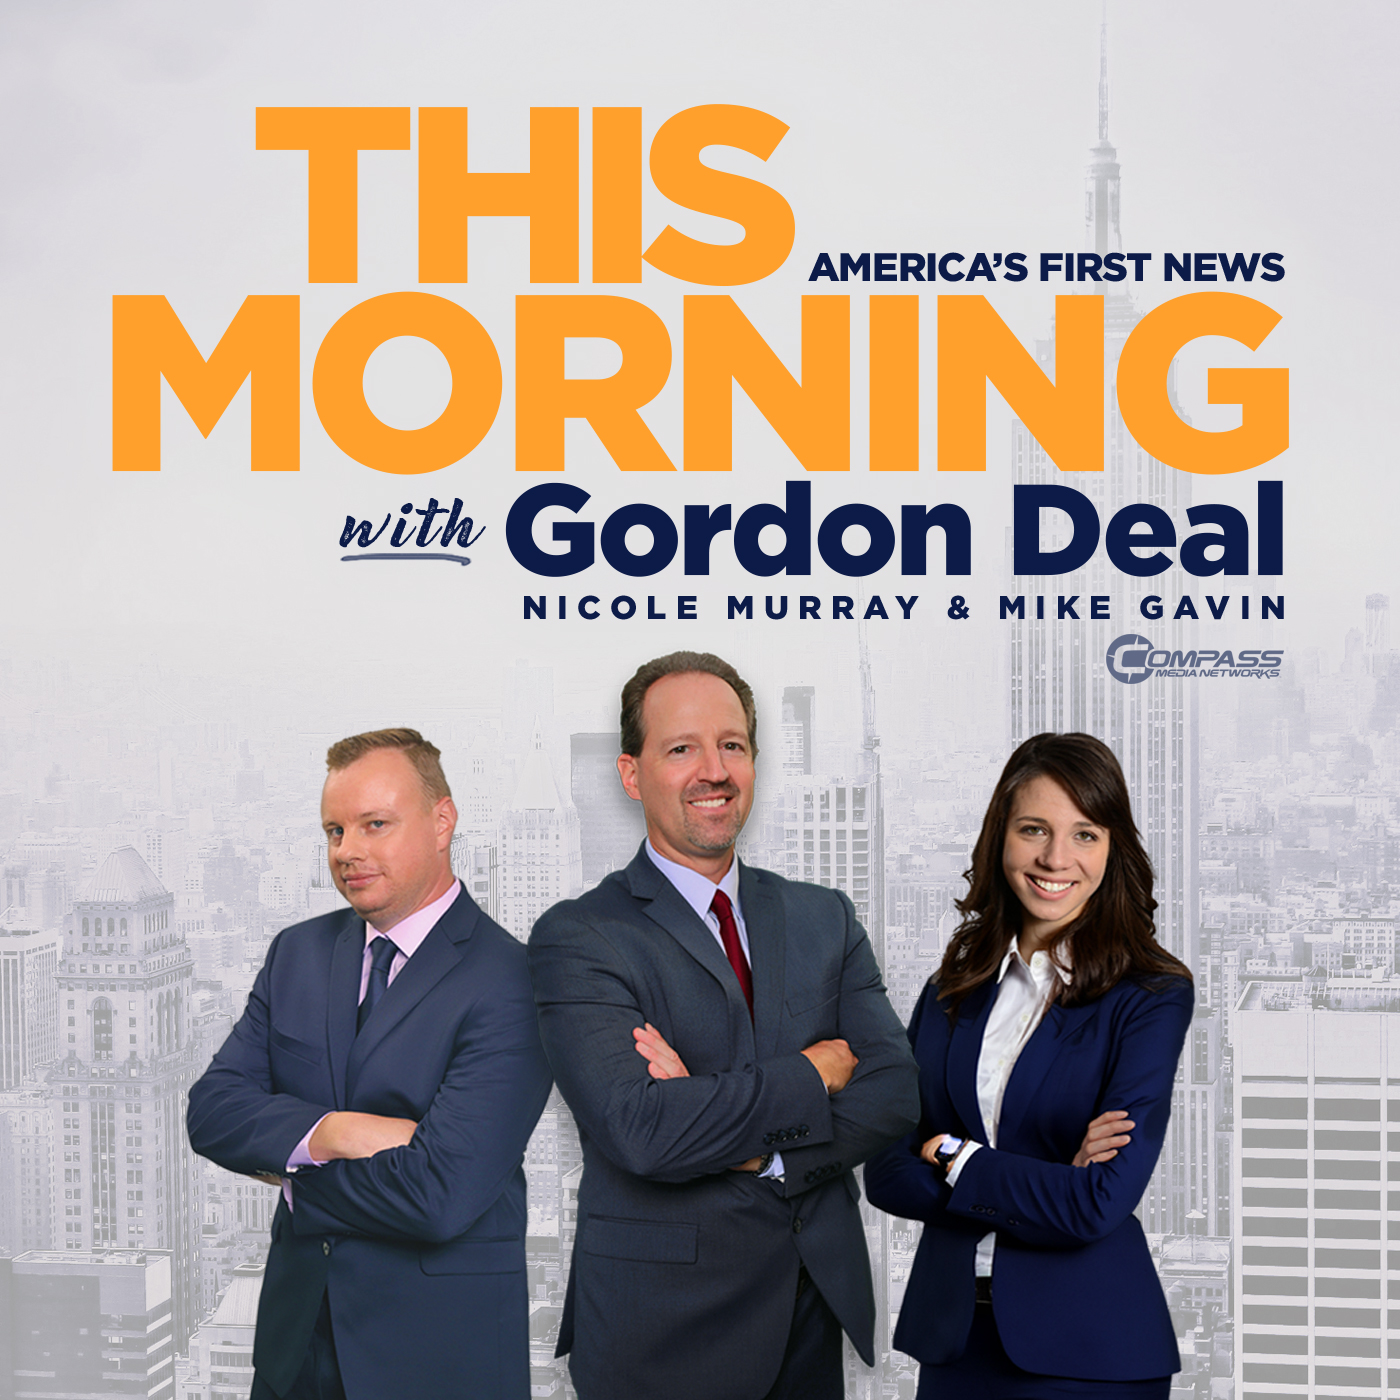 This Morning—America’s First News with Gordon Deal